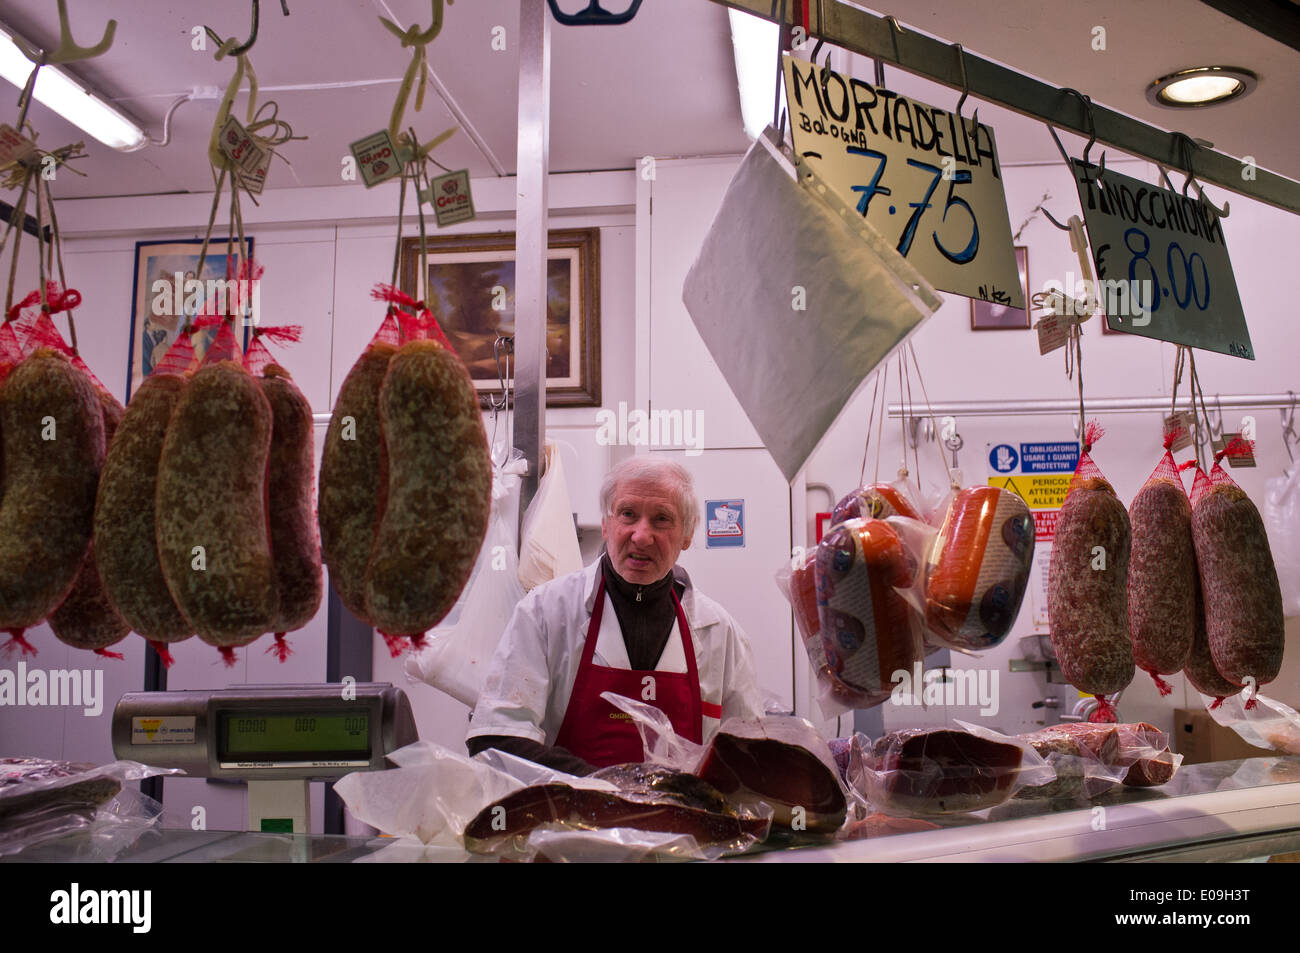 A butcher sells meat at Luciano's meat stand in the Mercato Centrale di San Lorenzo Market, offering primary ingredients of Tusc Stock Photo